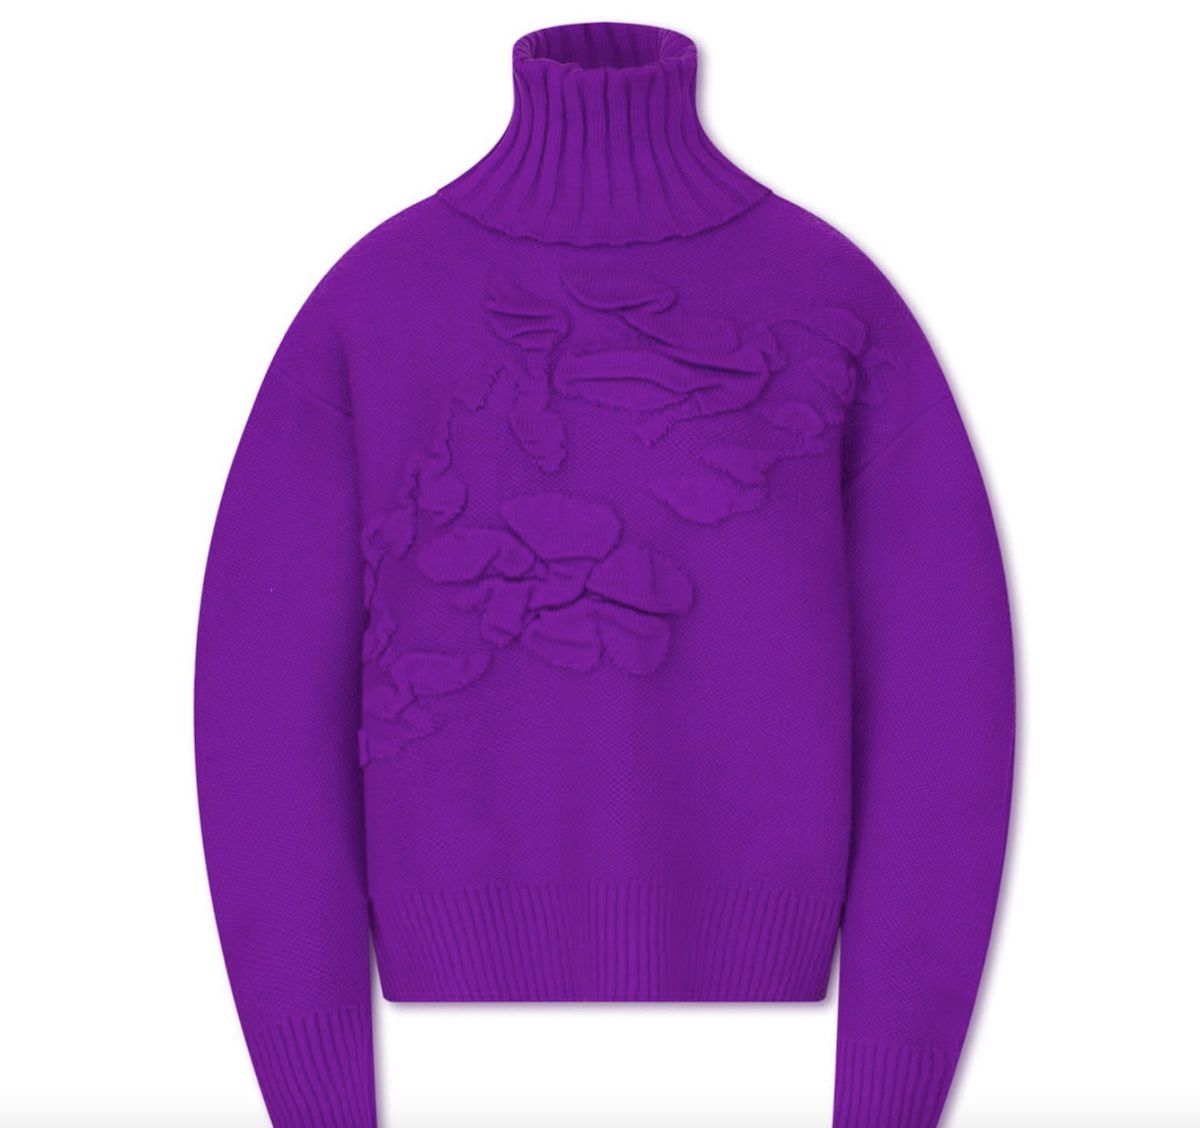 Buy It! Daige Xenon Knit Sweater, $201; wolfandbadger.com https://www.wolfandbadger.com/us/xenon-knit-sweater-violet/